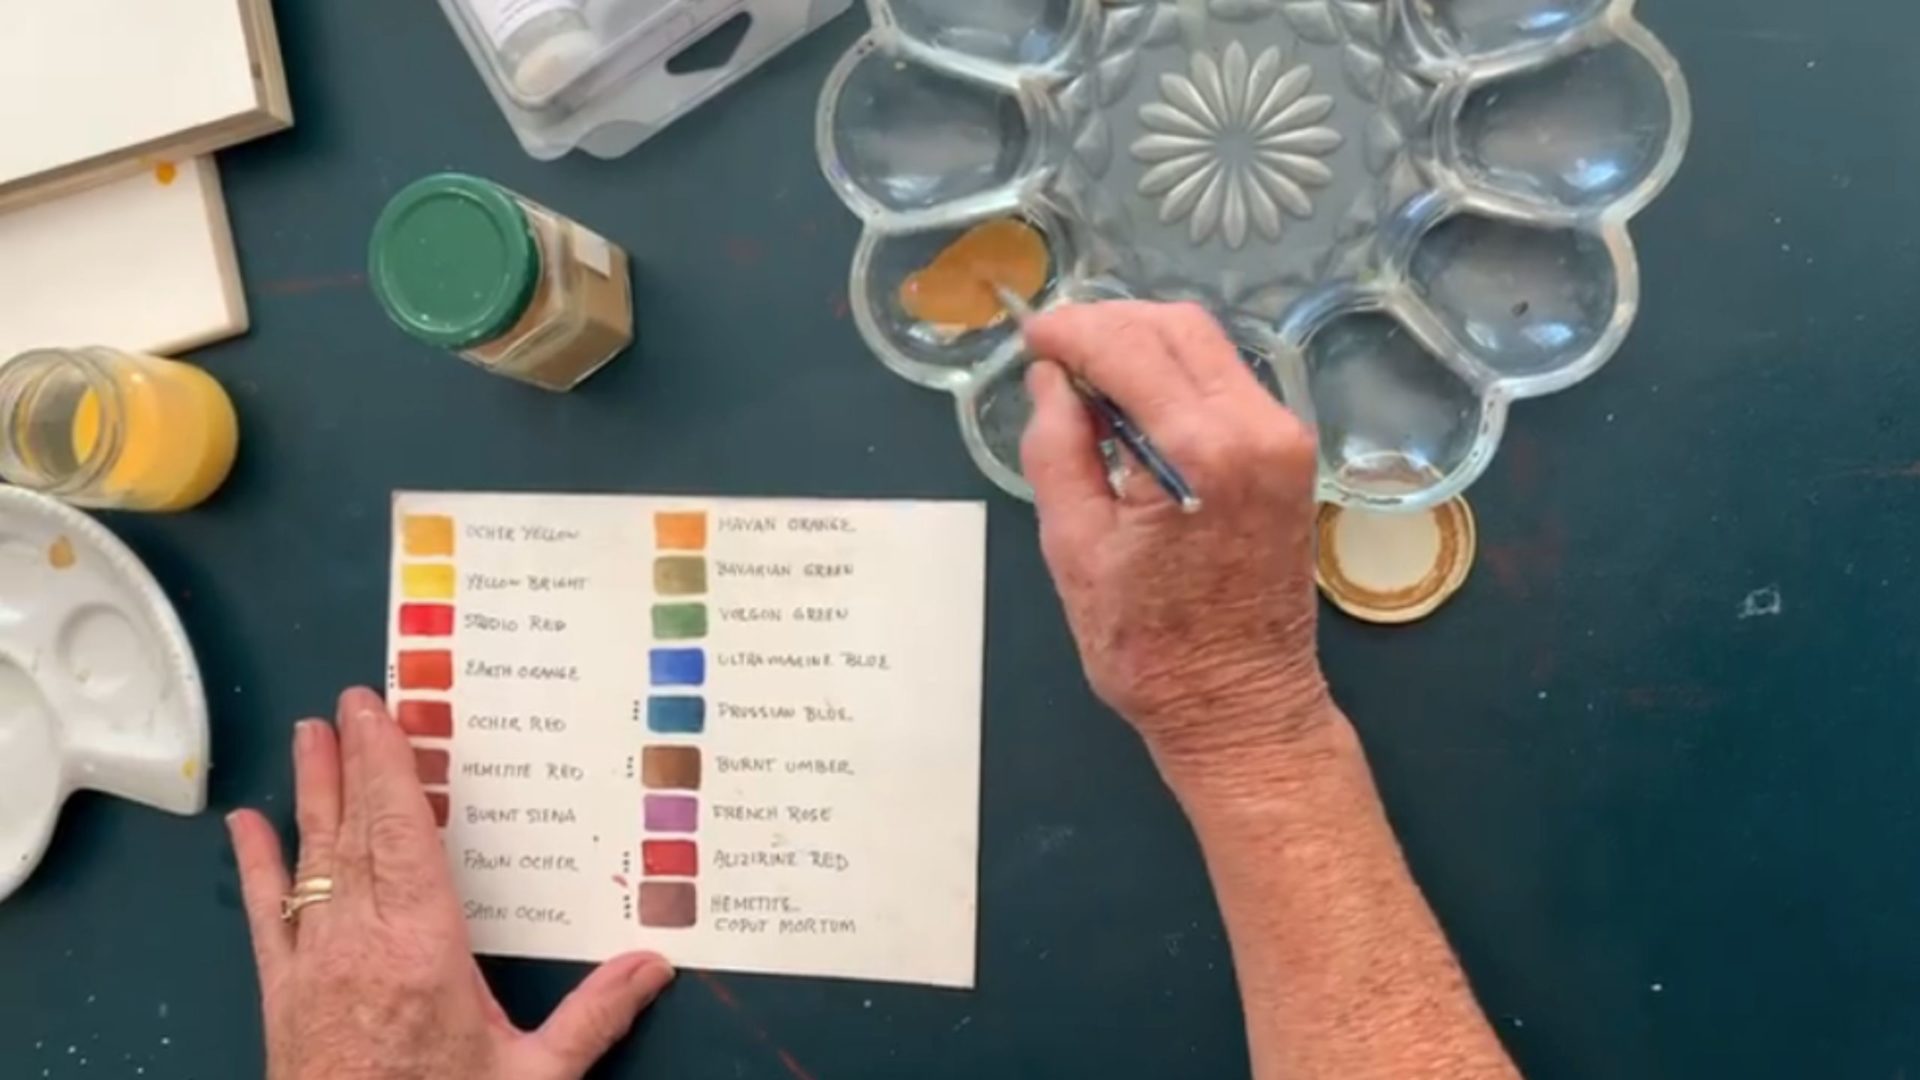 6 Ways You Can Use Your Art Supplies Safely - The Earth Pigments